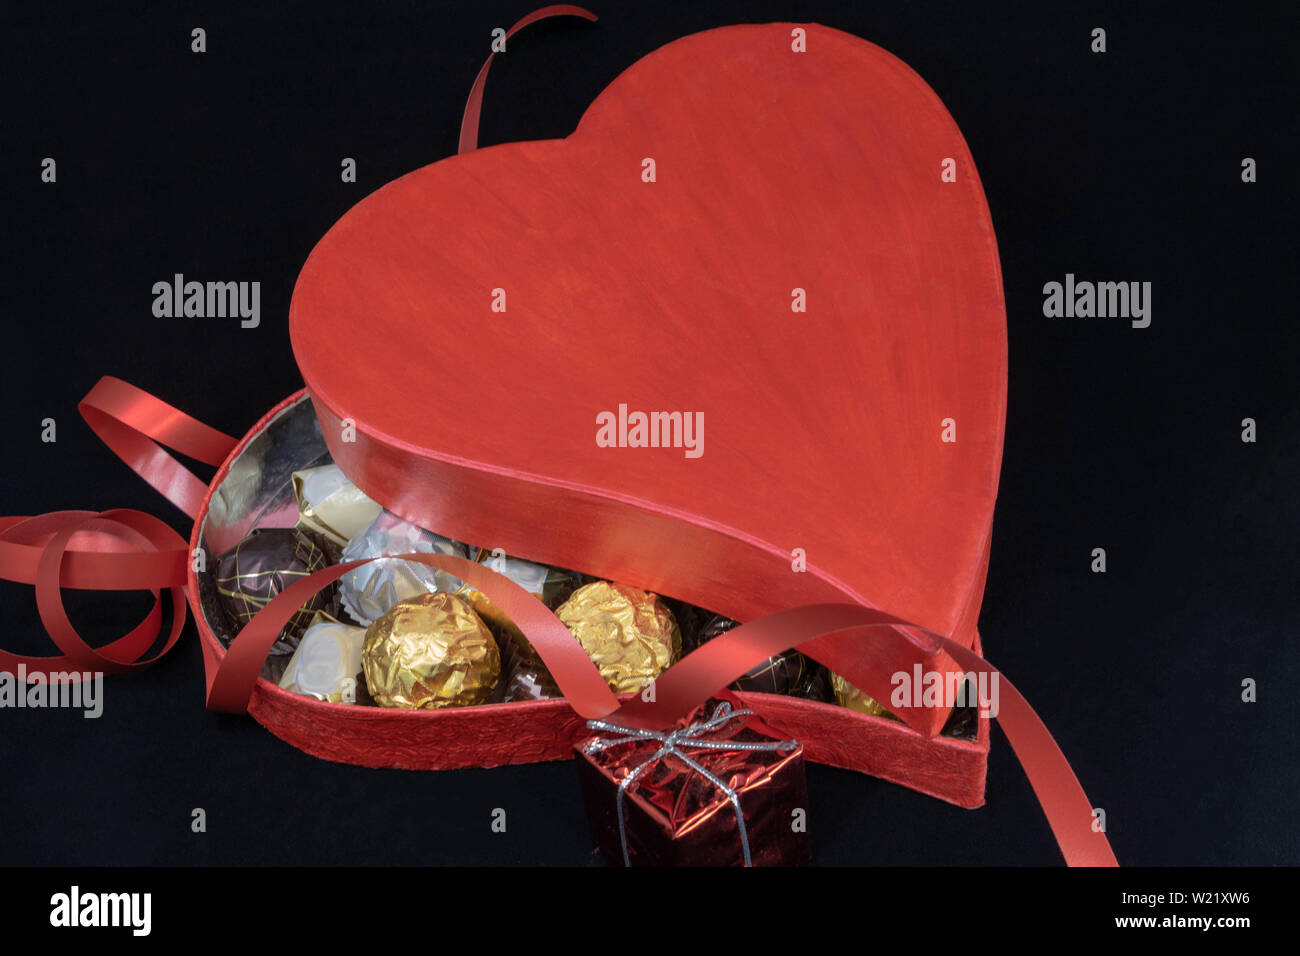 Declaration of love: to offer a box of chocolates in the shape of heart, of passion red color Stock Photo